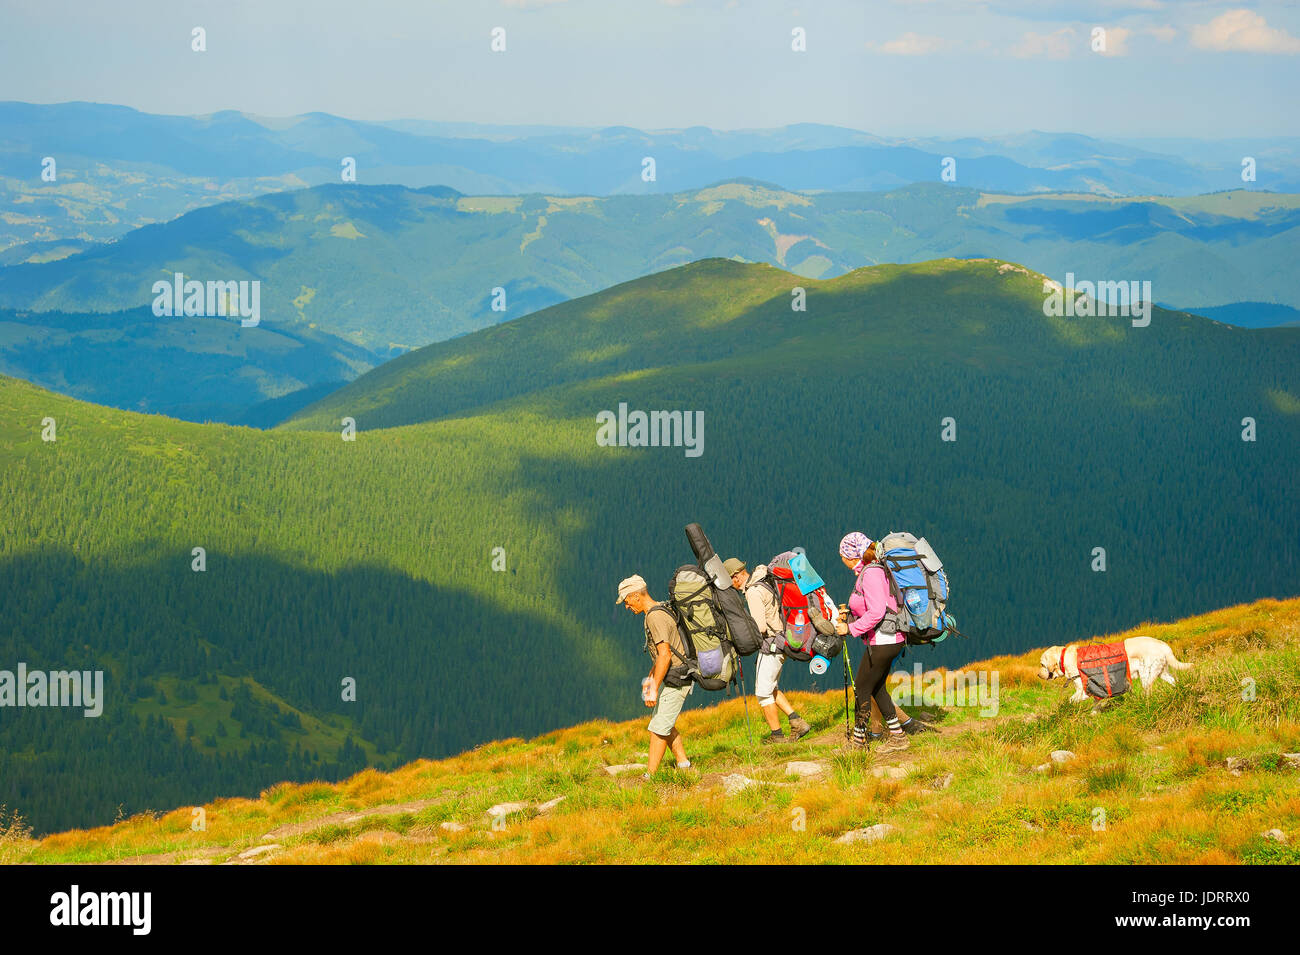 CARPATHIANS MOUNTAINS, UKRAINE - AUG 04, 2016: Group of hikers with a dog on top of mountains. Ukraine used to attract more than 20 million tourist ev Stock Photo